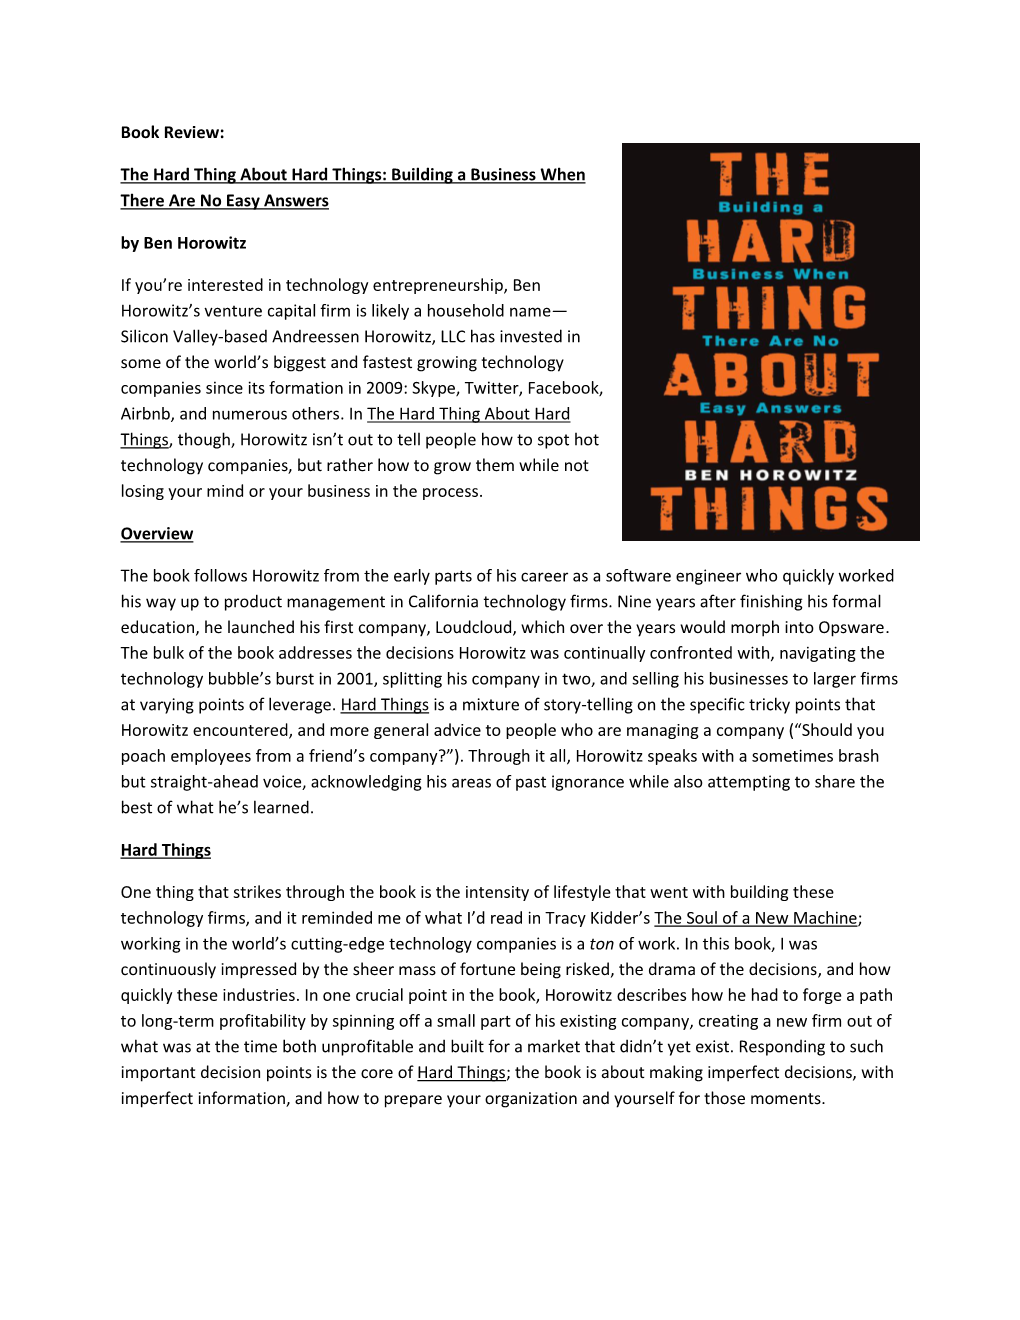 Book Review: the Hard Thing About Hard Things: Building a Business